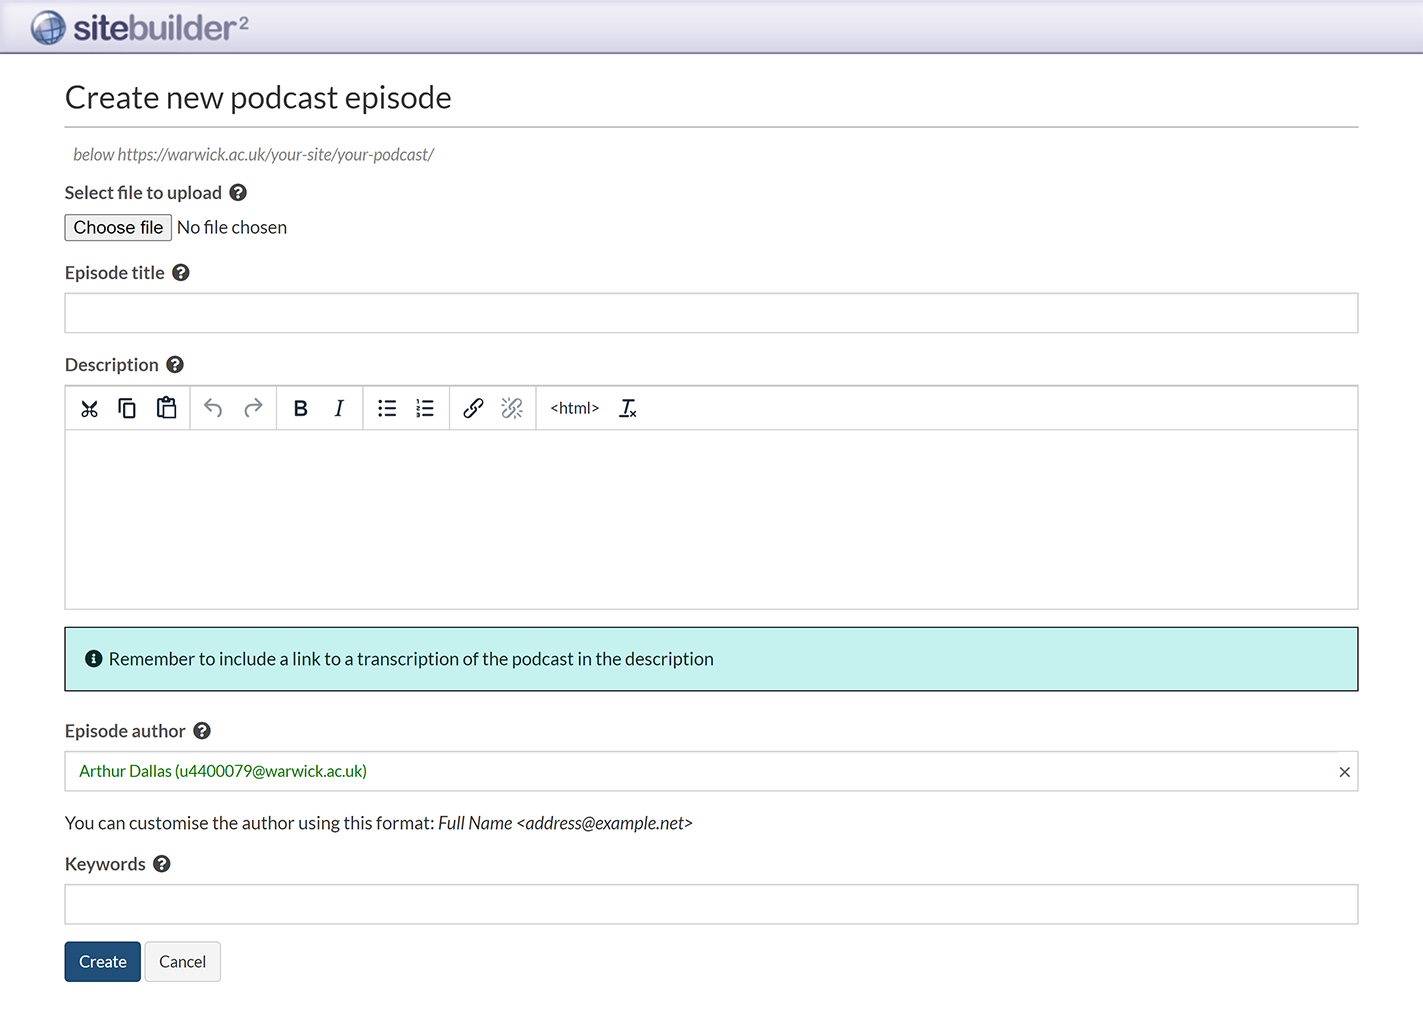 The 'Create new podcast episode' screen